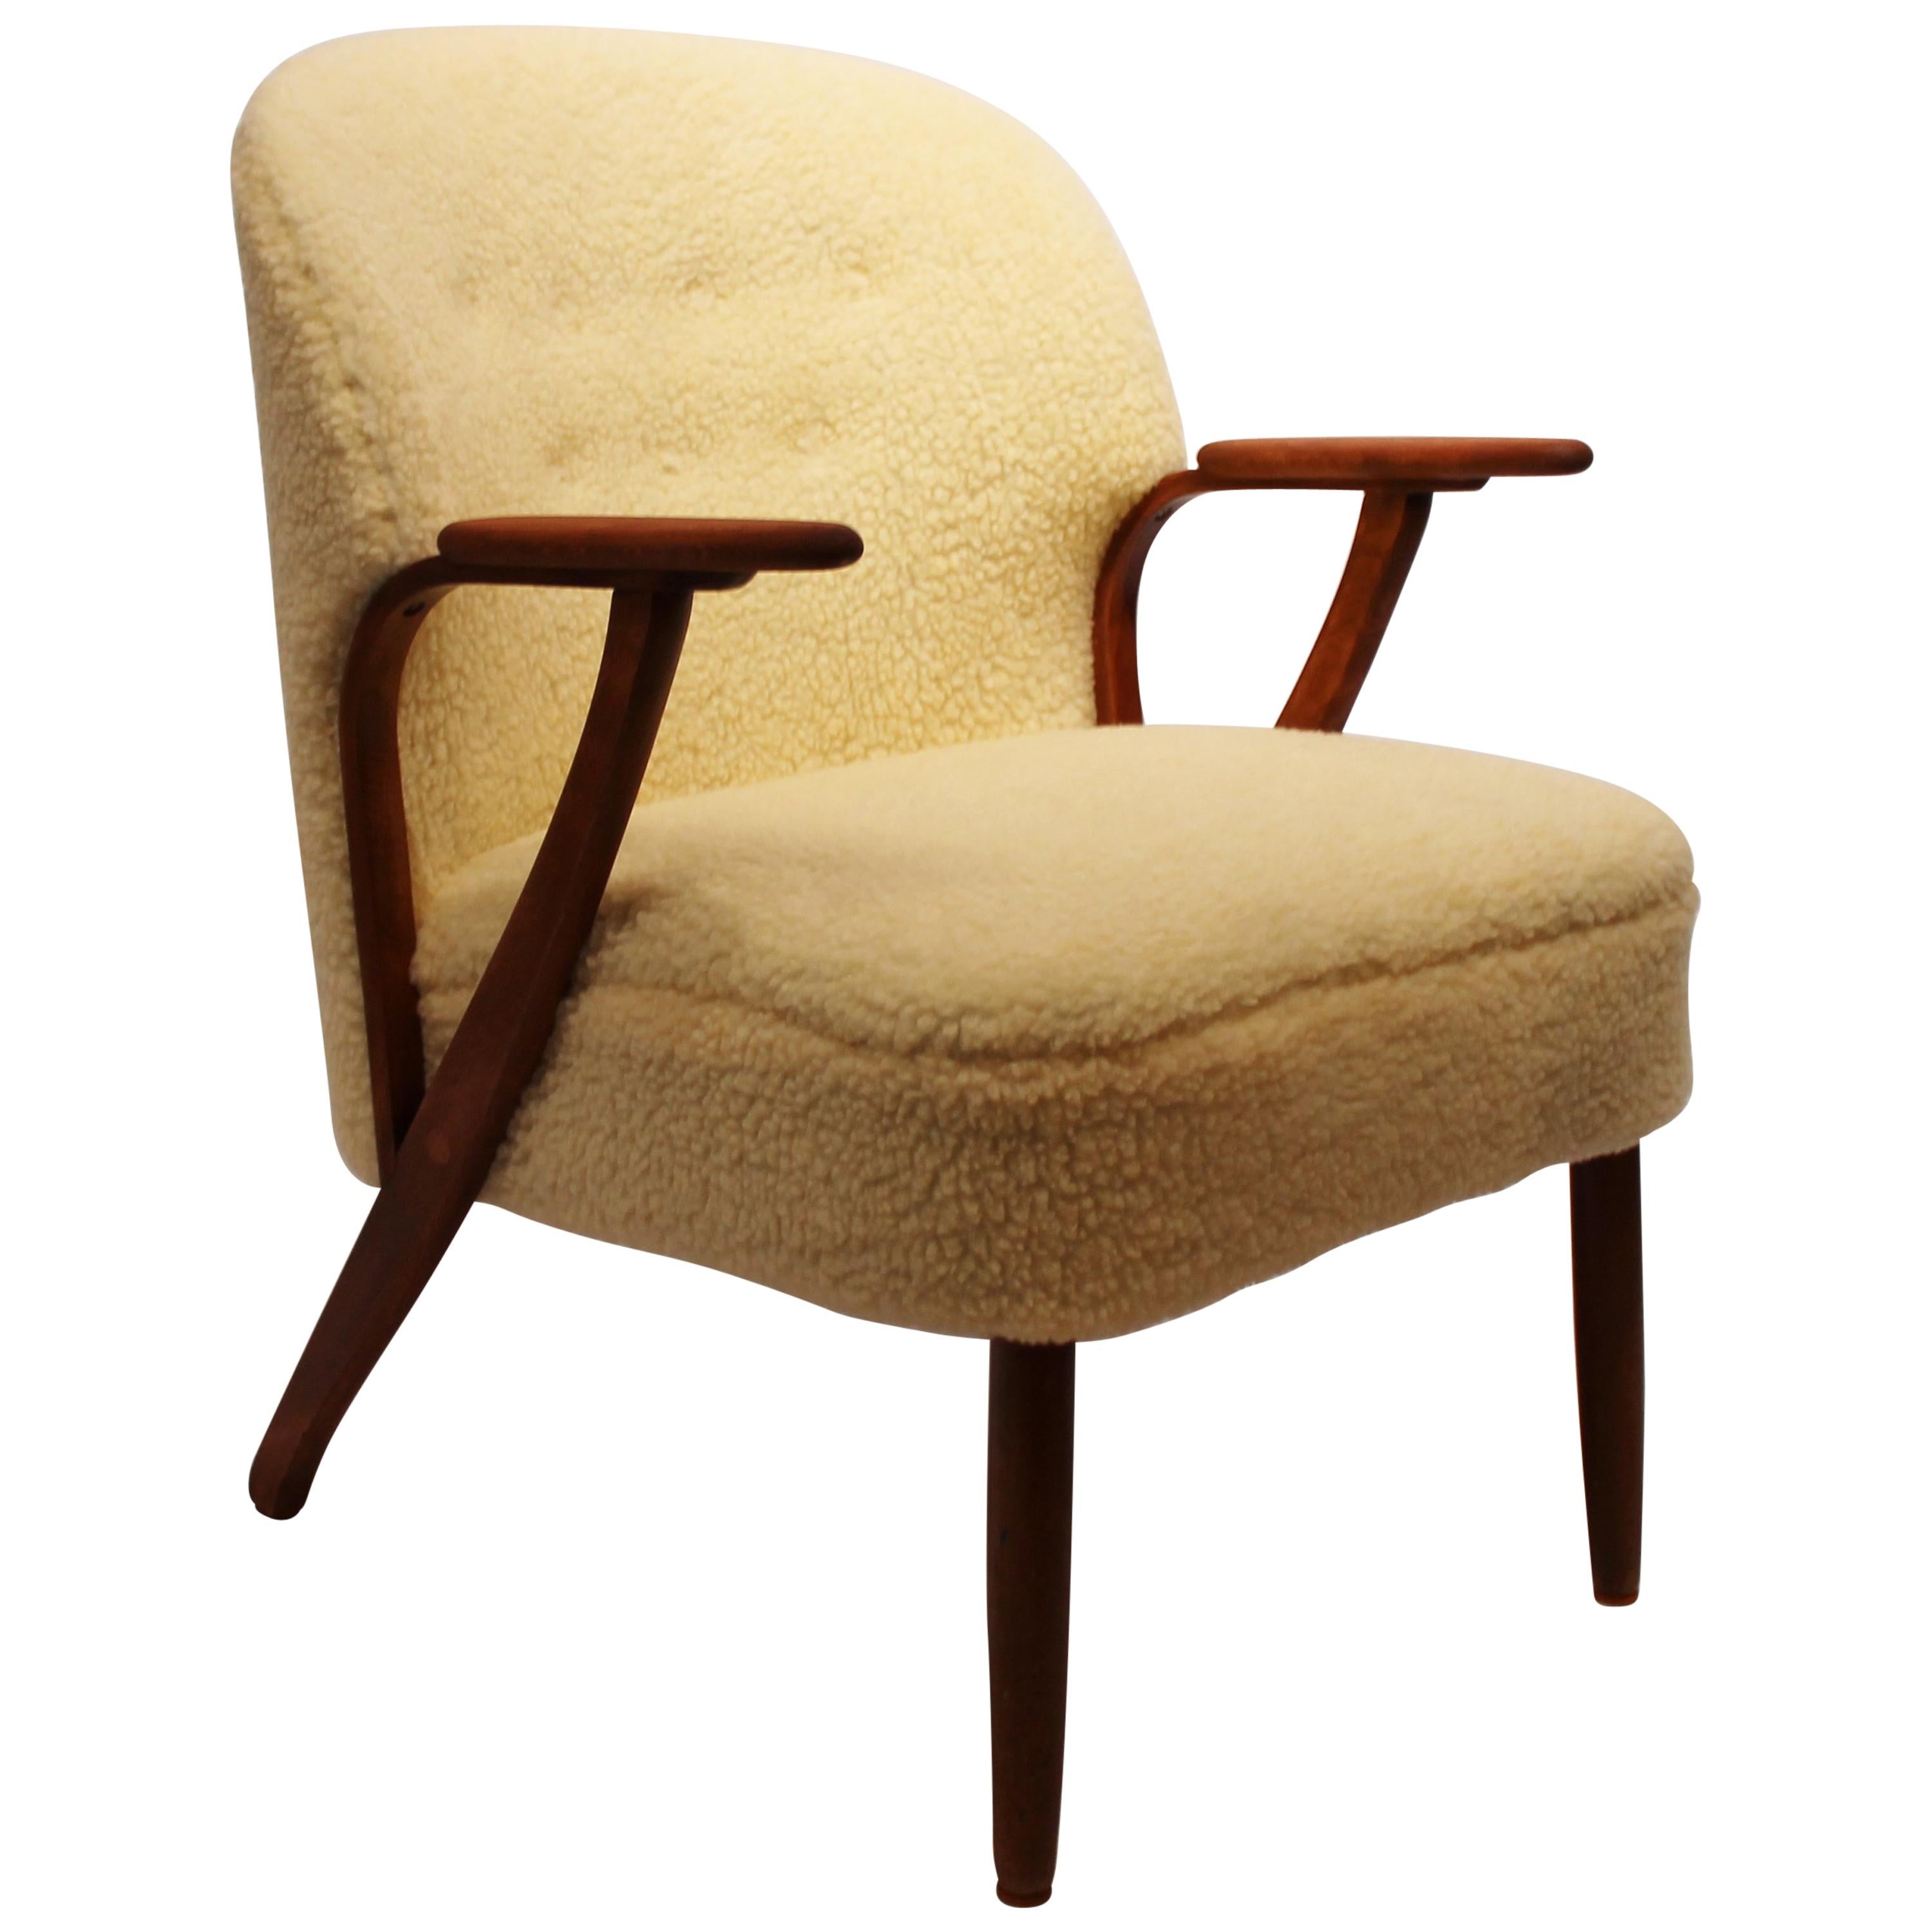 Easy Chair Upholstered in Sheep Wool, Danish Design, 1960s